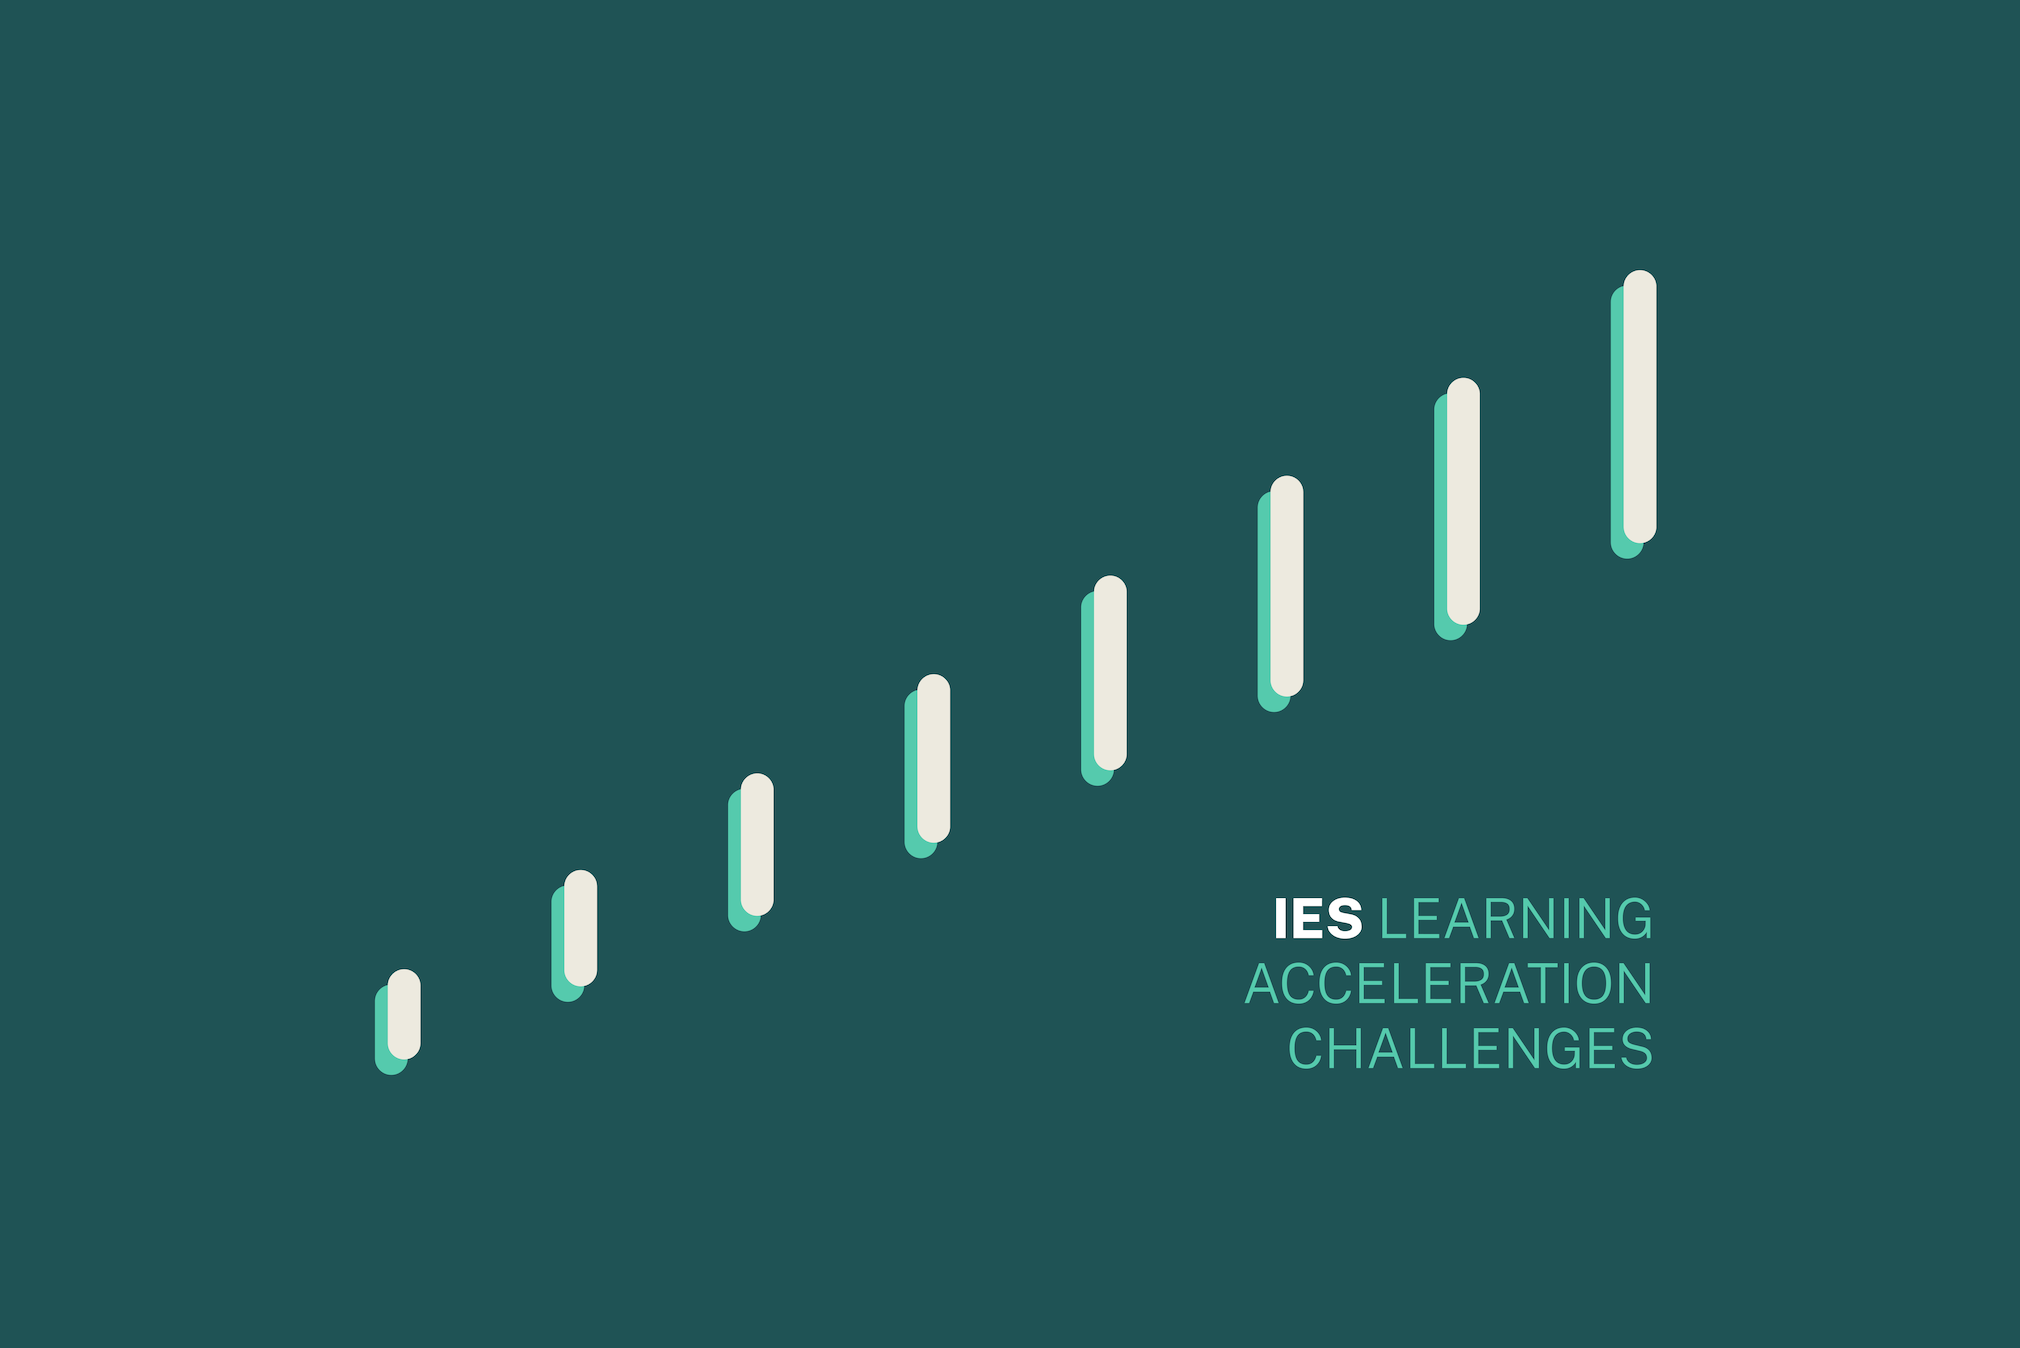 Luminary Labs to design and produce IES Learning Acceleration Challenges